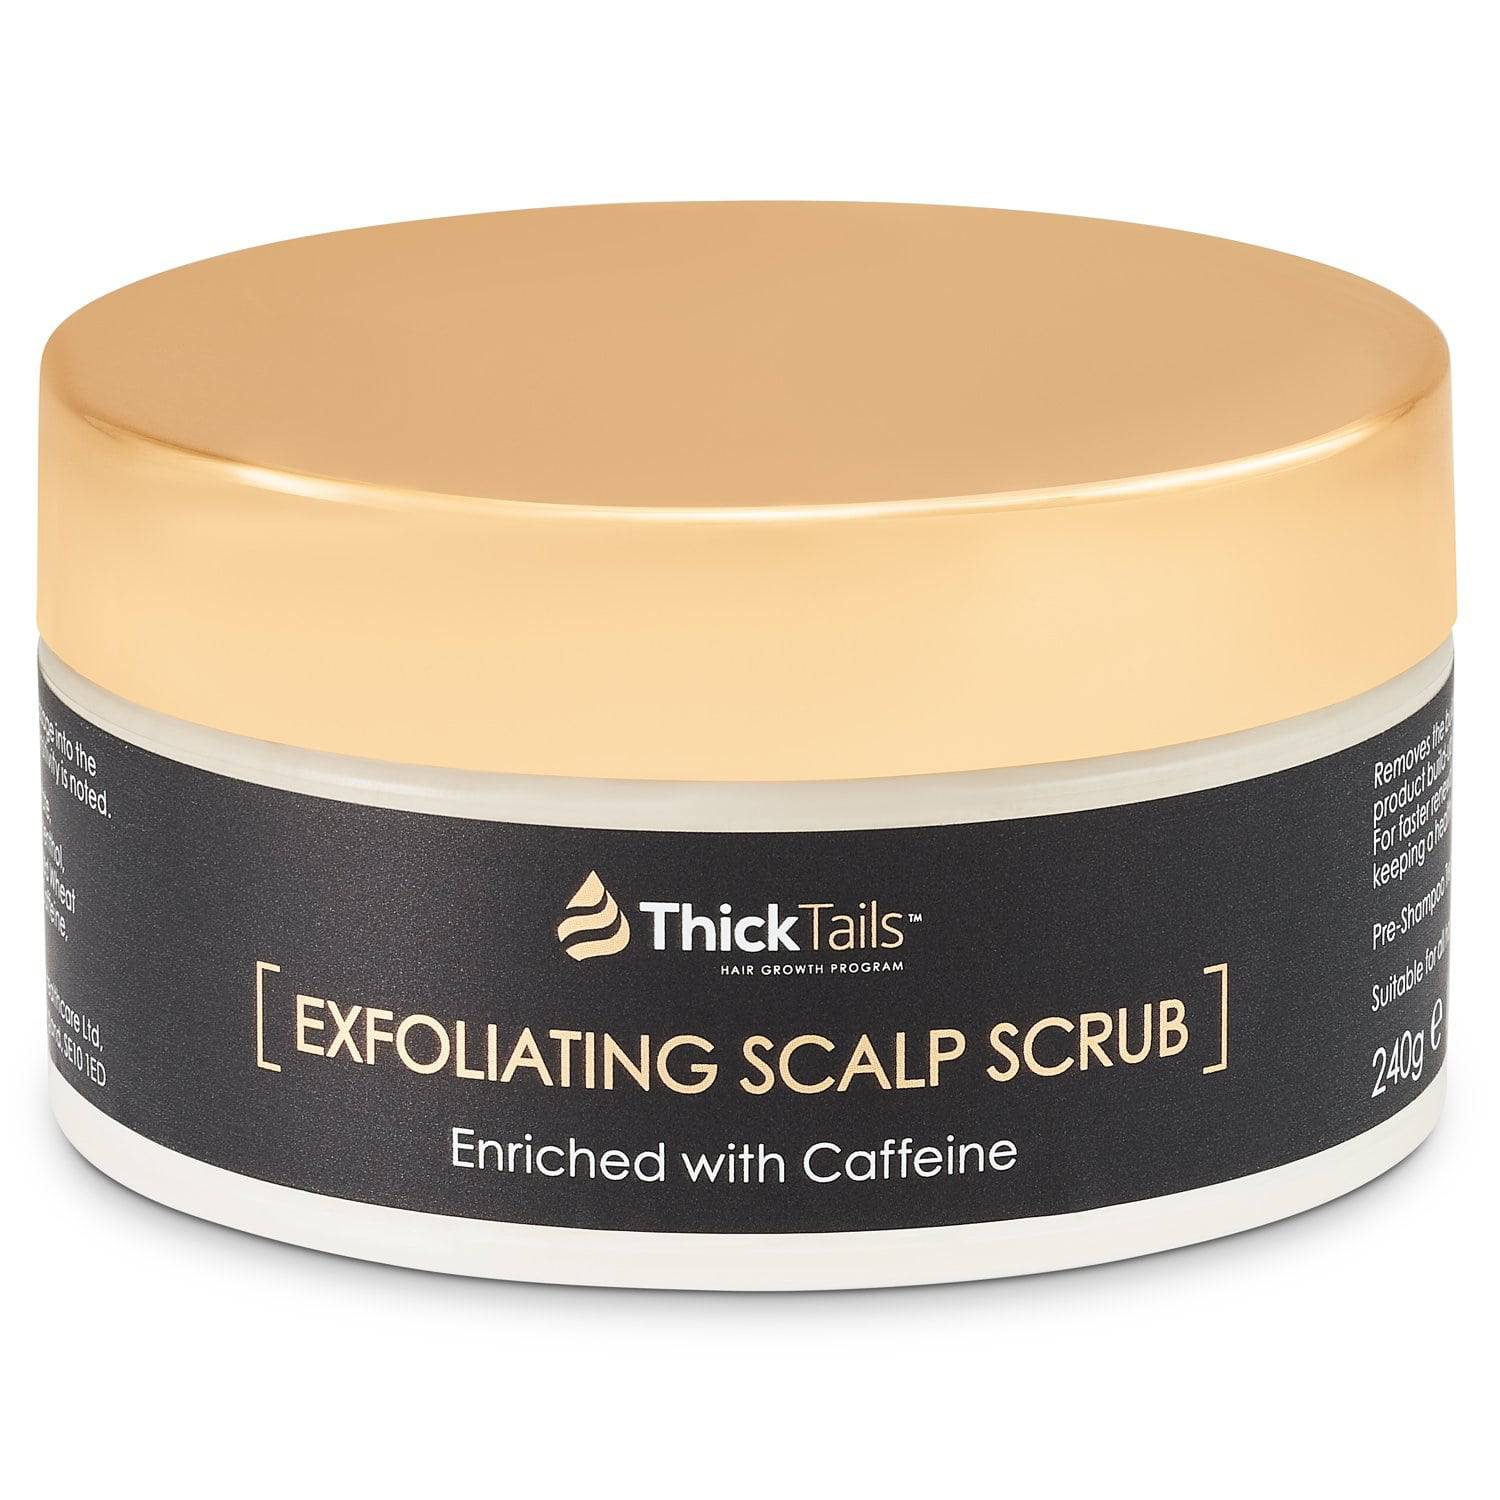 ThickTails Exfoliating Scalp Scrub Treatment to Soothe a Dry, Flaky, Itchy Scalp | 240g